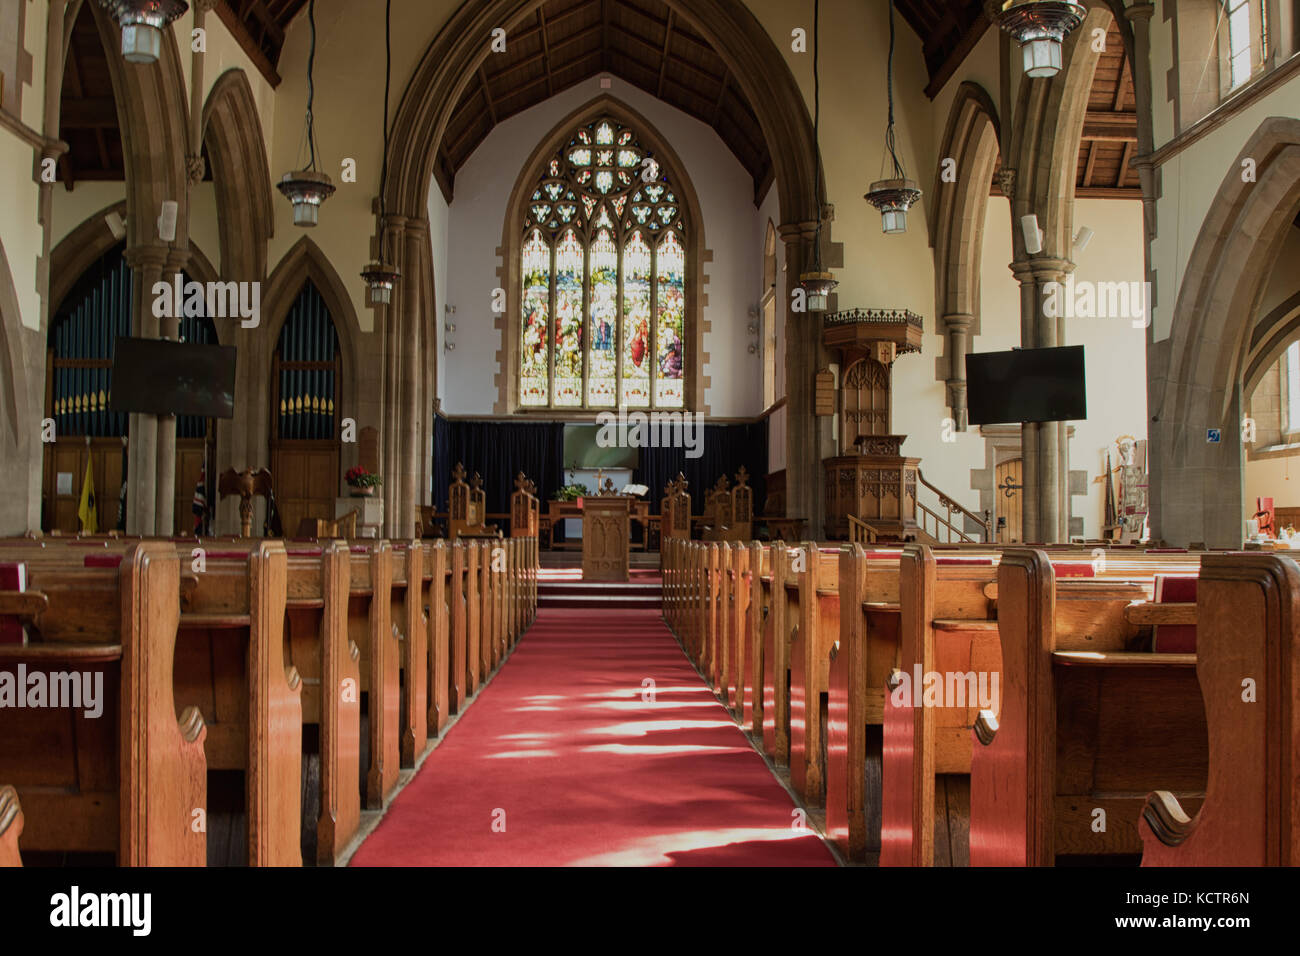 Le pont United Reformed Church, Otley, West Yorkshire, Angleterre, Royaume-Uni. Banque D'Images